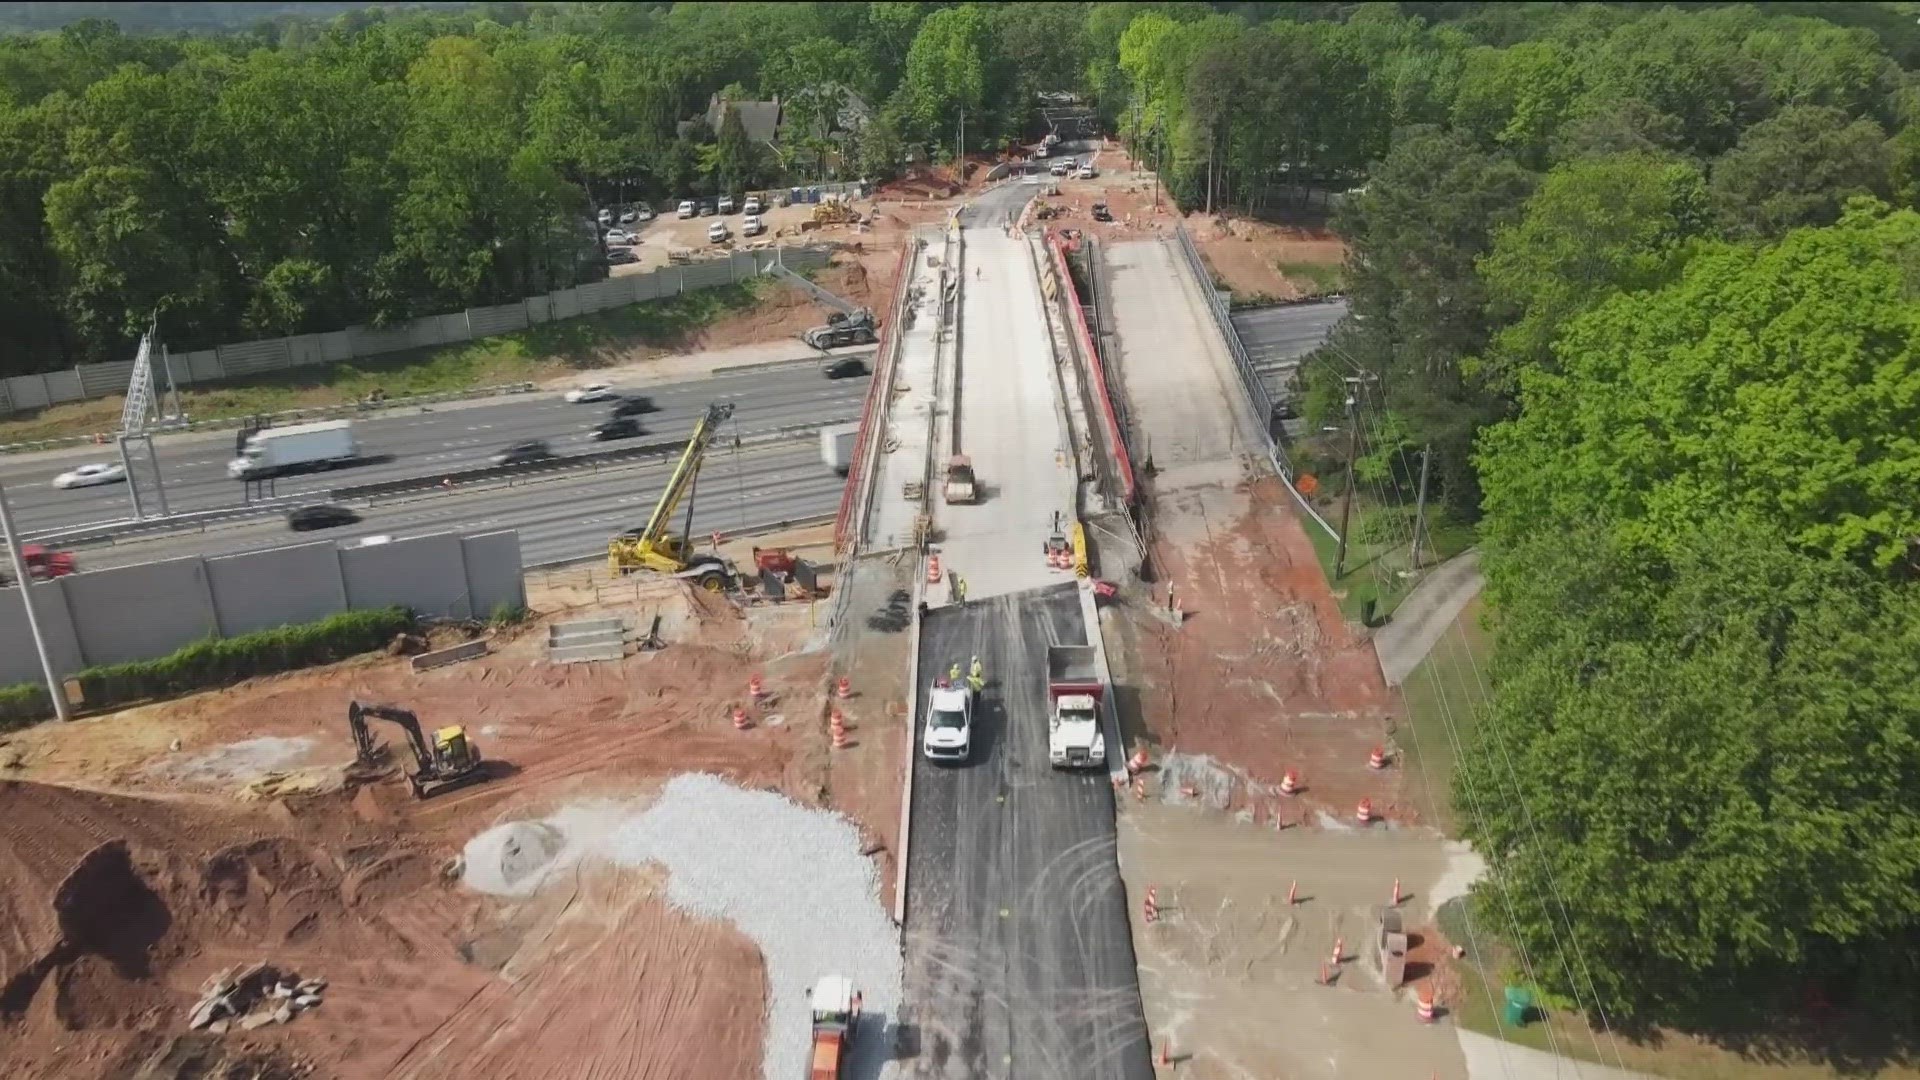 The new bridge won't be open to pedestrian traffic until work is complete on the sidewalks.